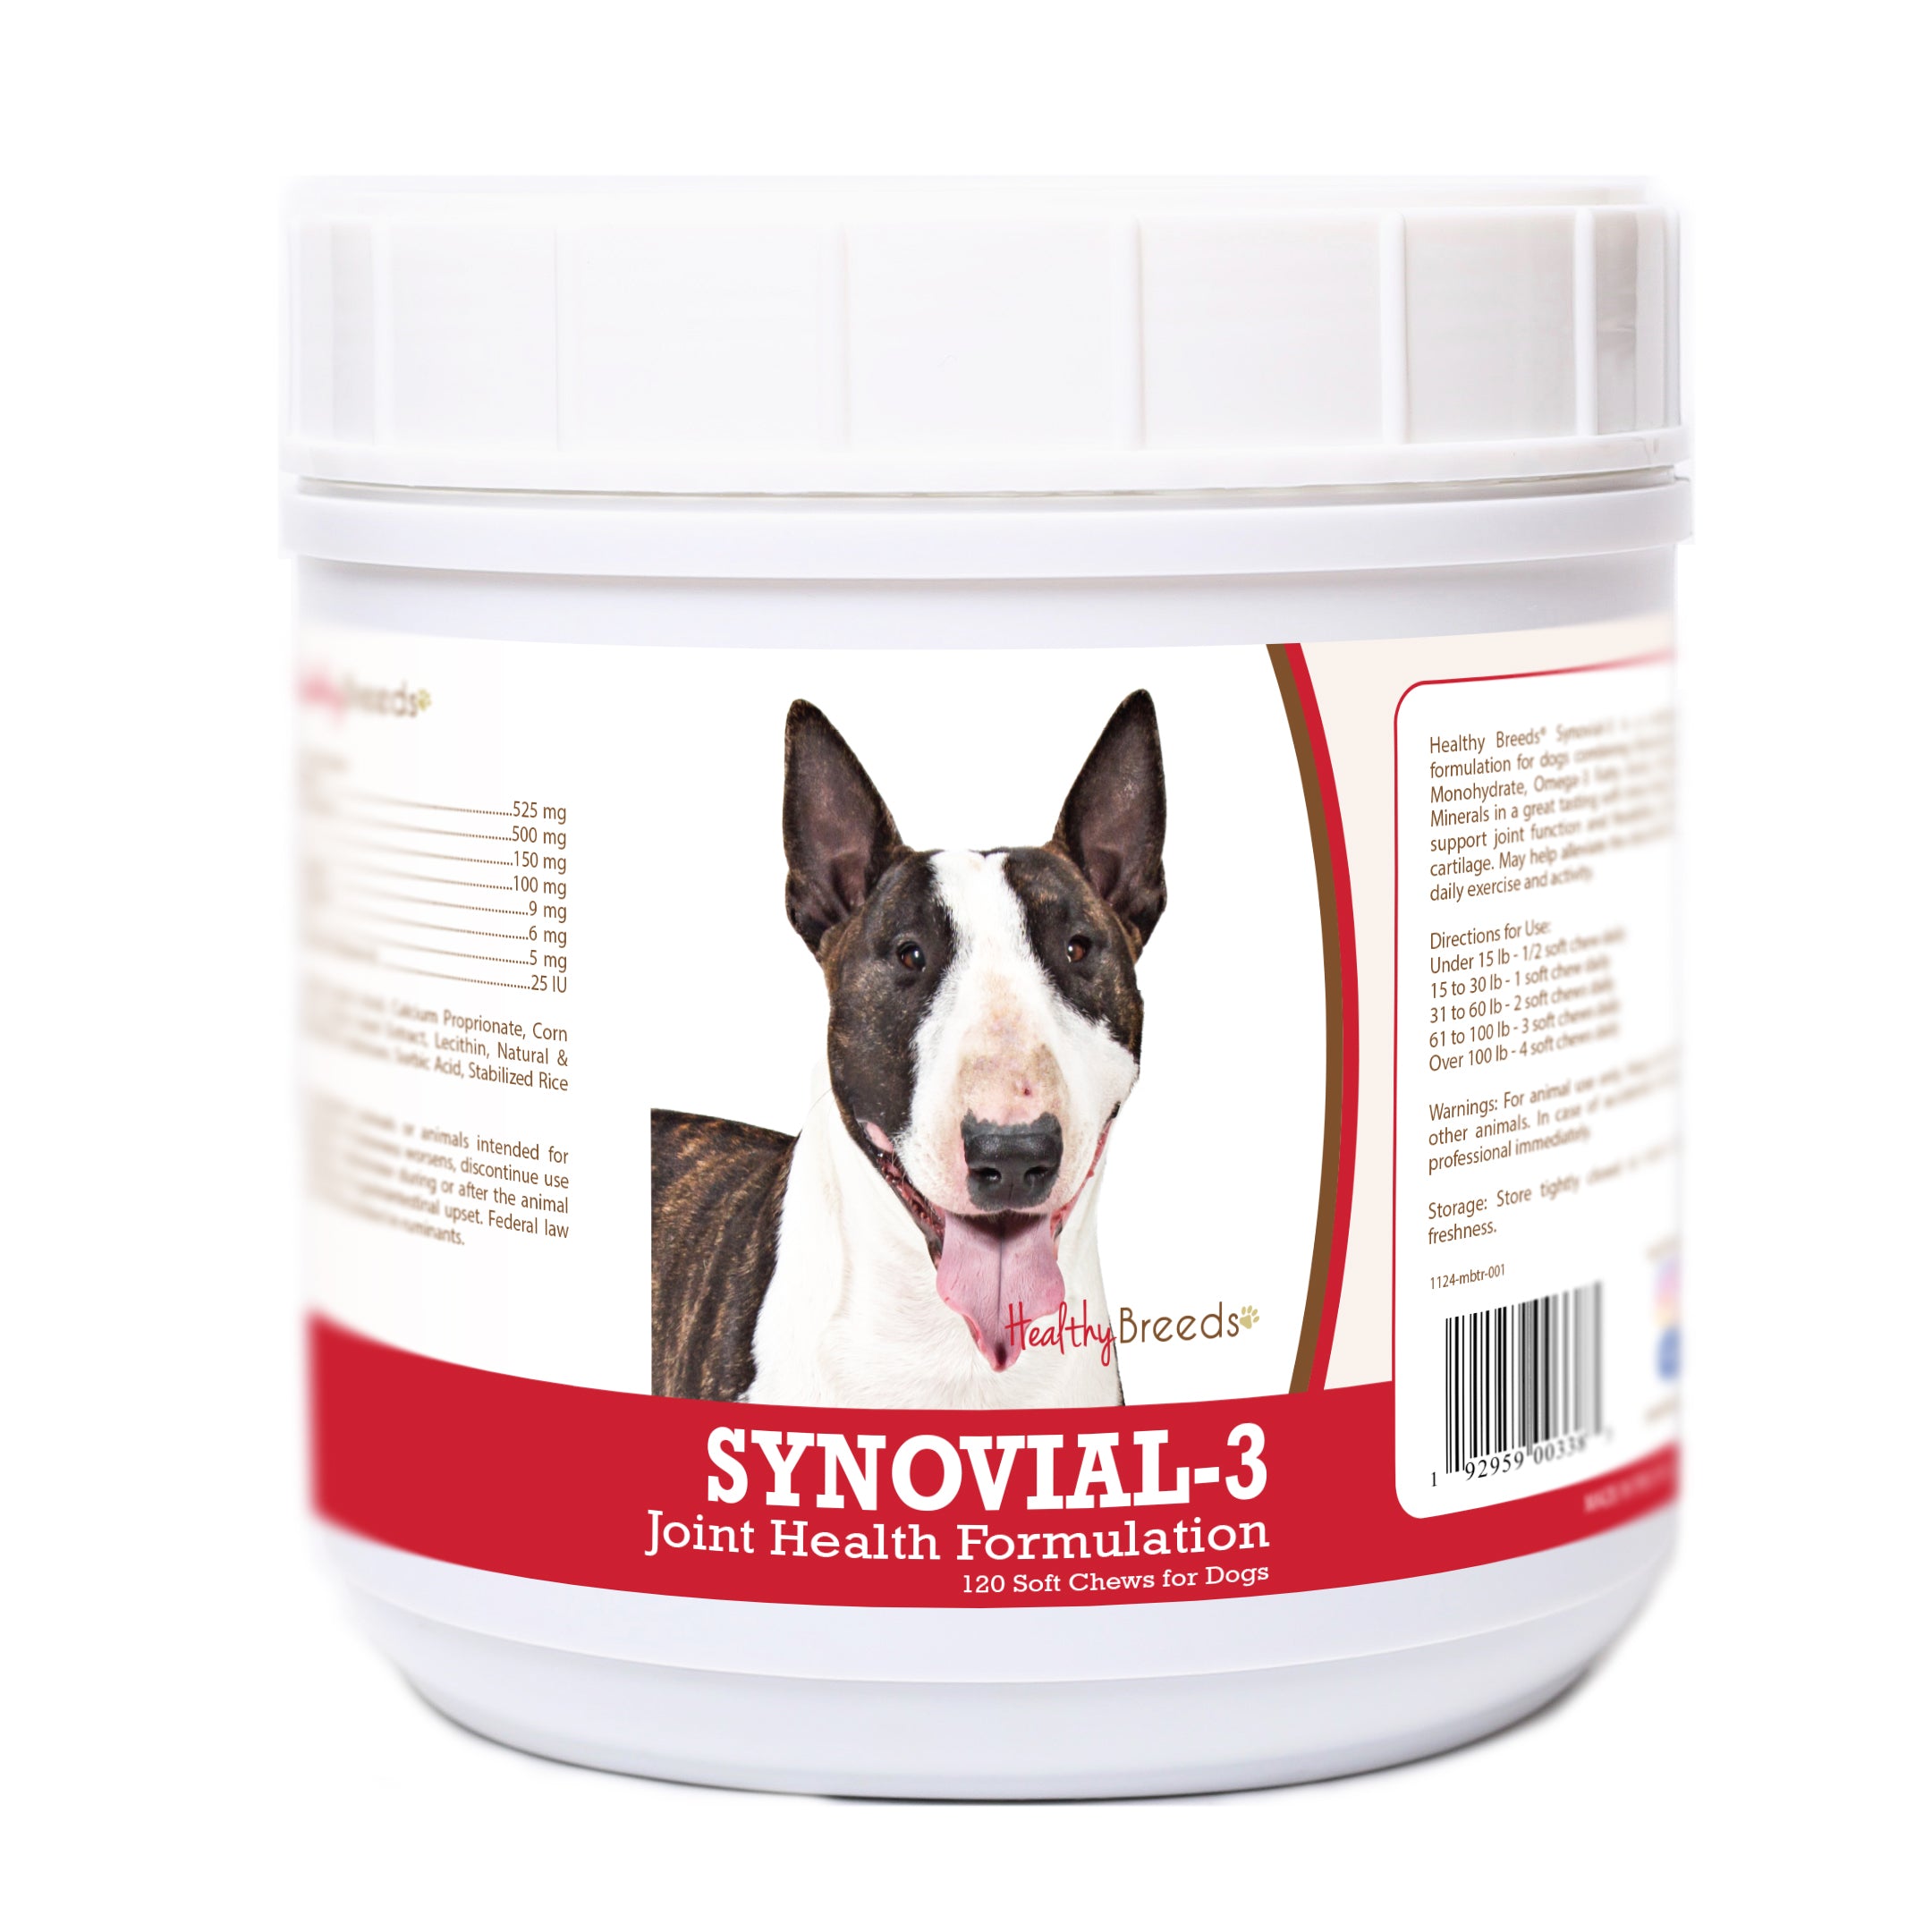 Miniature Bull Terrier Synovial-3 Joint Health Formulation Soft Chews 120 Count